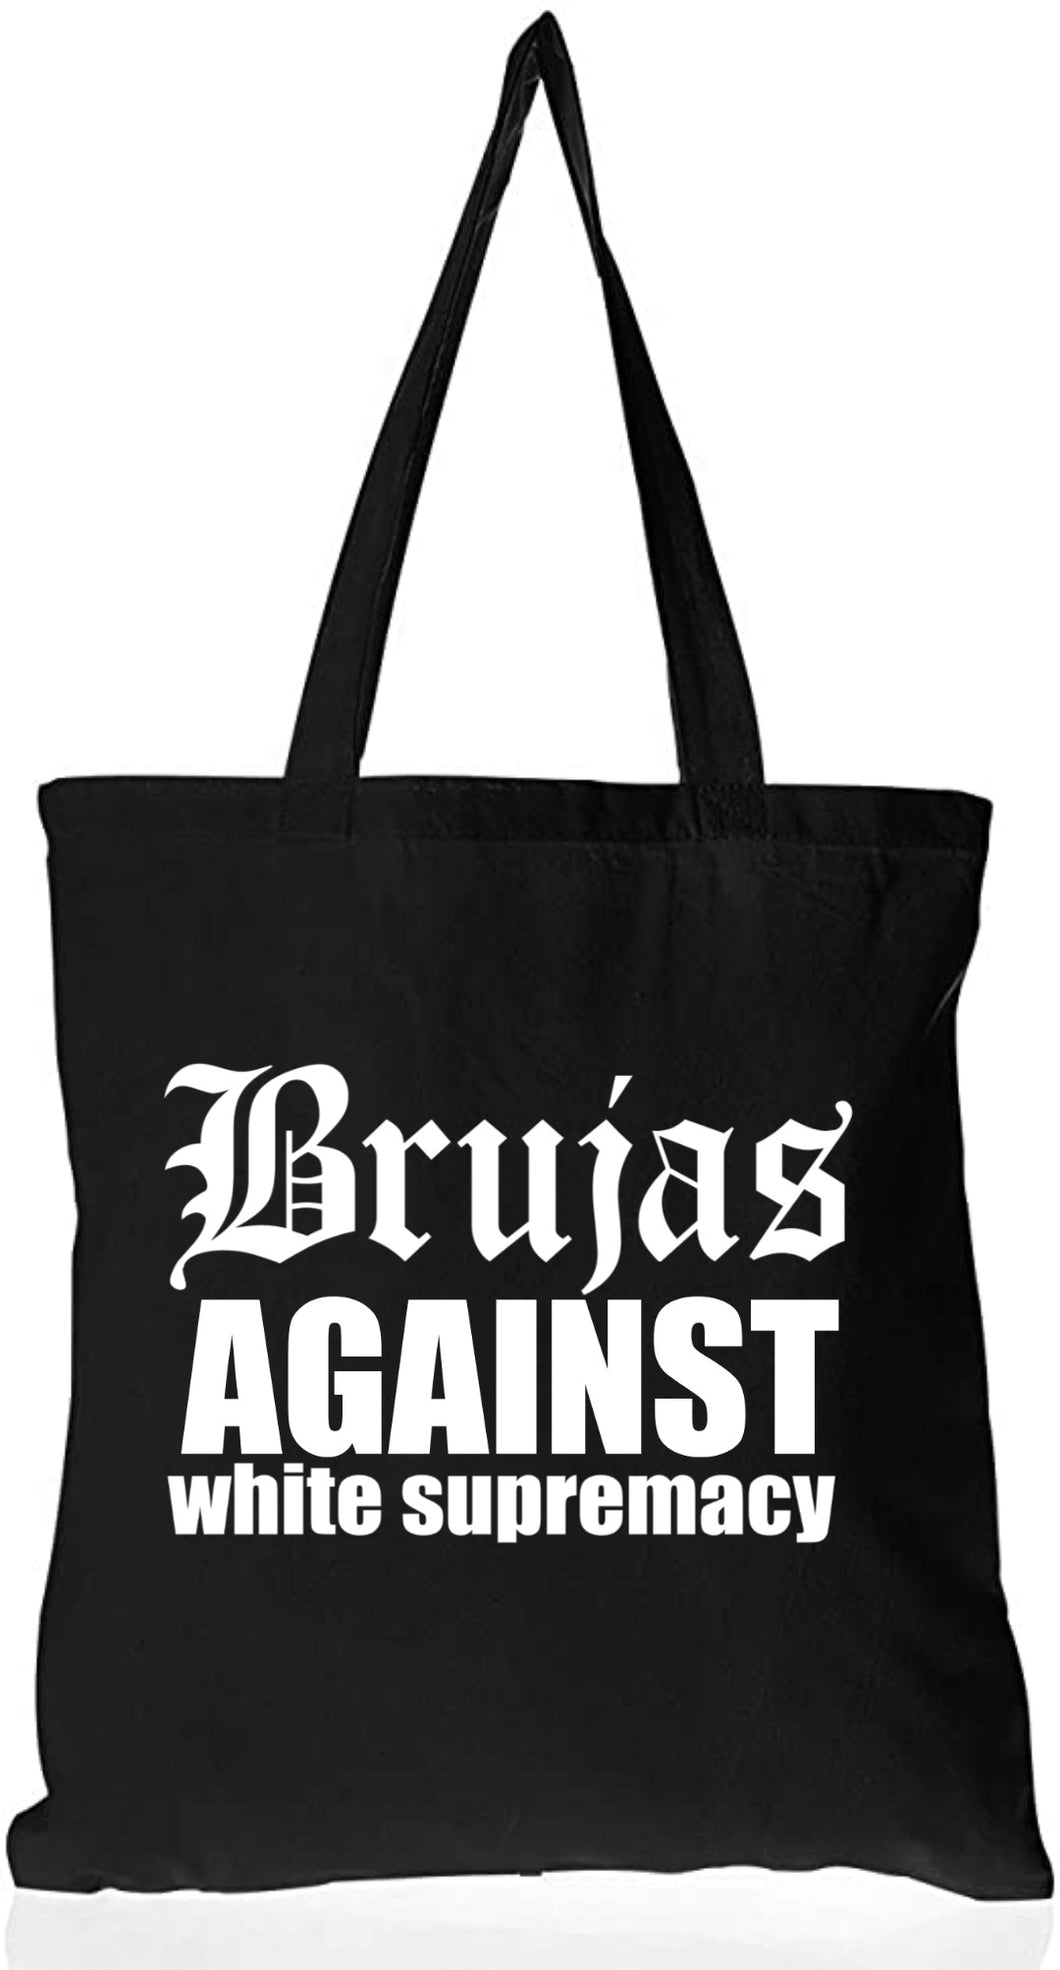 Brujas Against white supremacy Tote